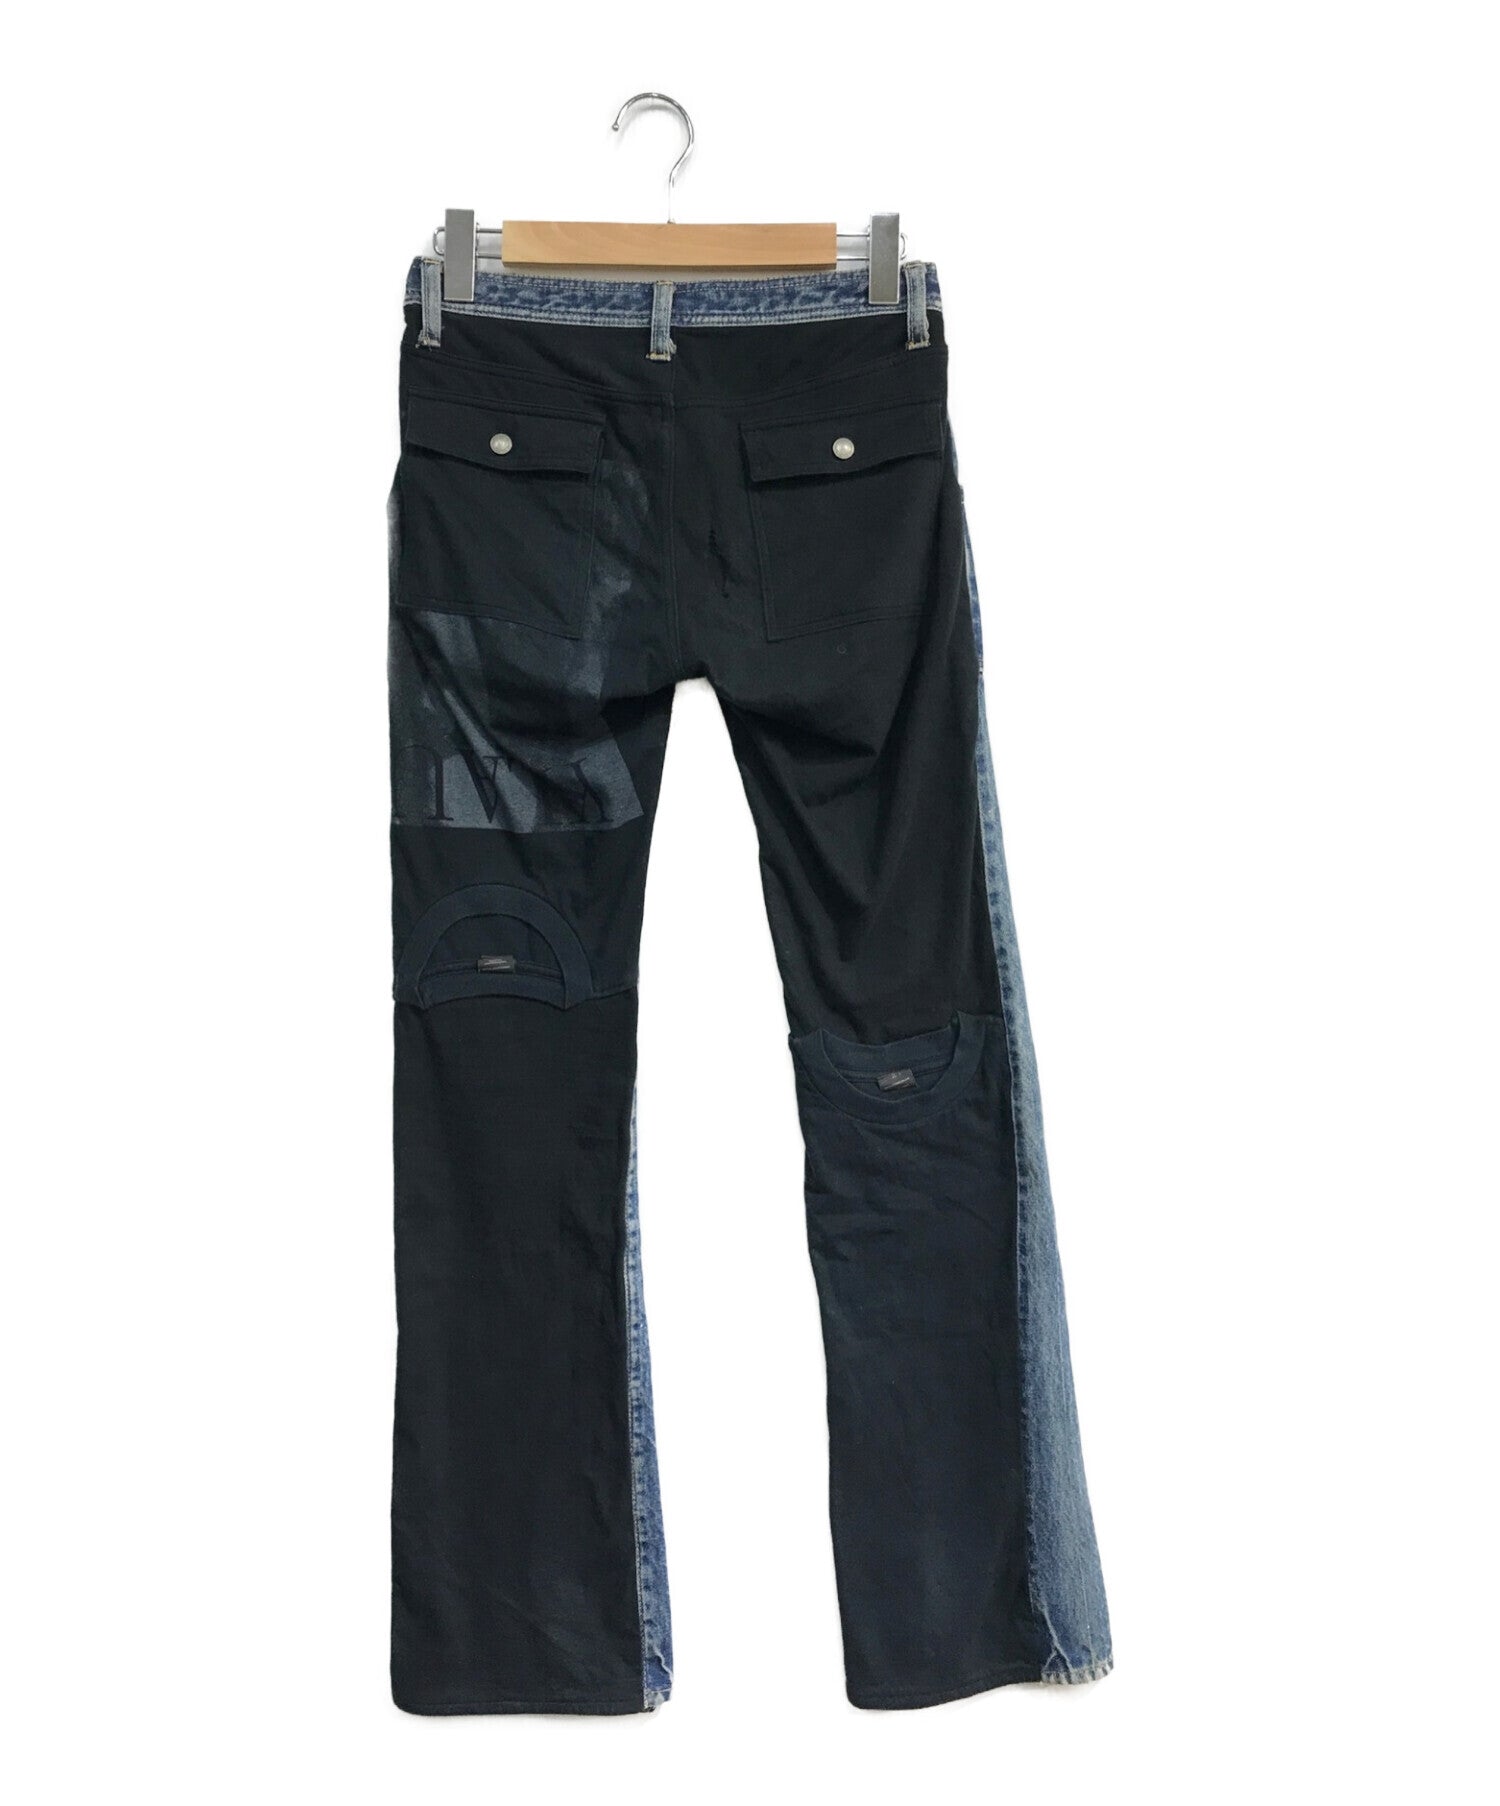 UNDERCOVER 06ss T period docking denim pants